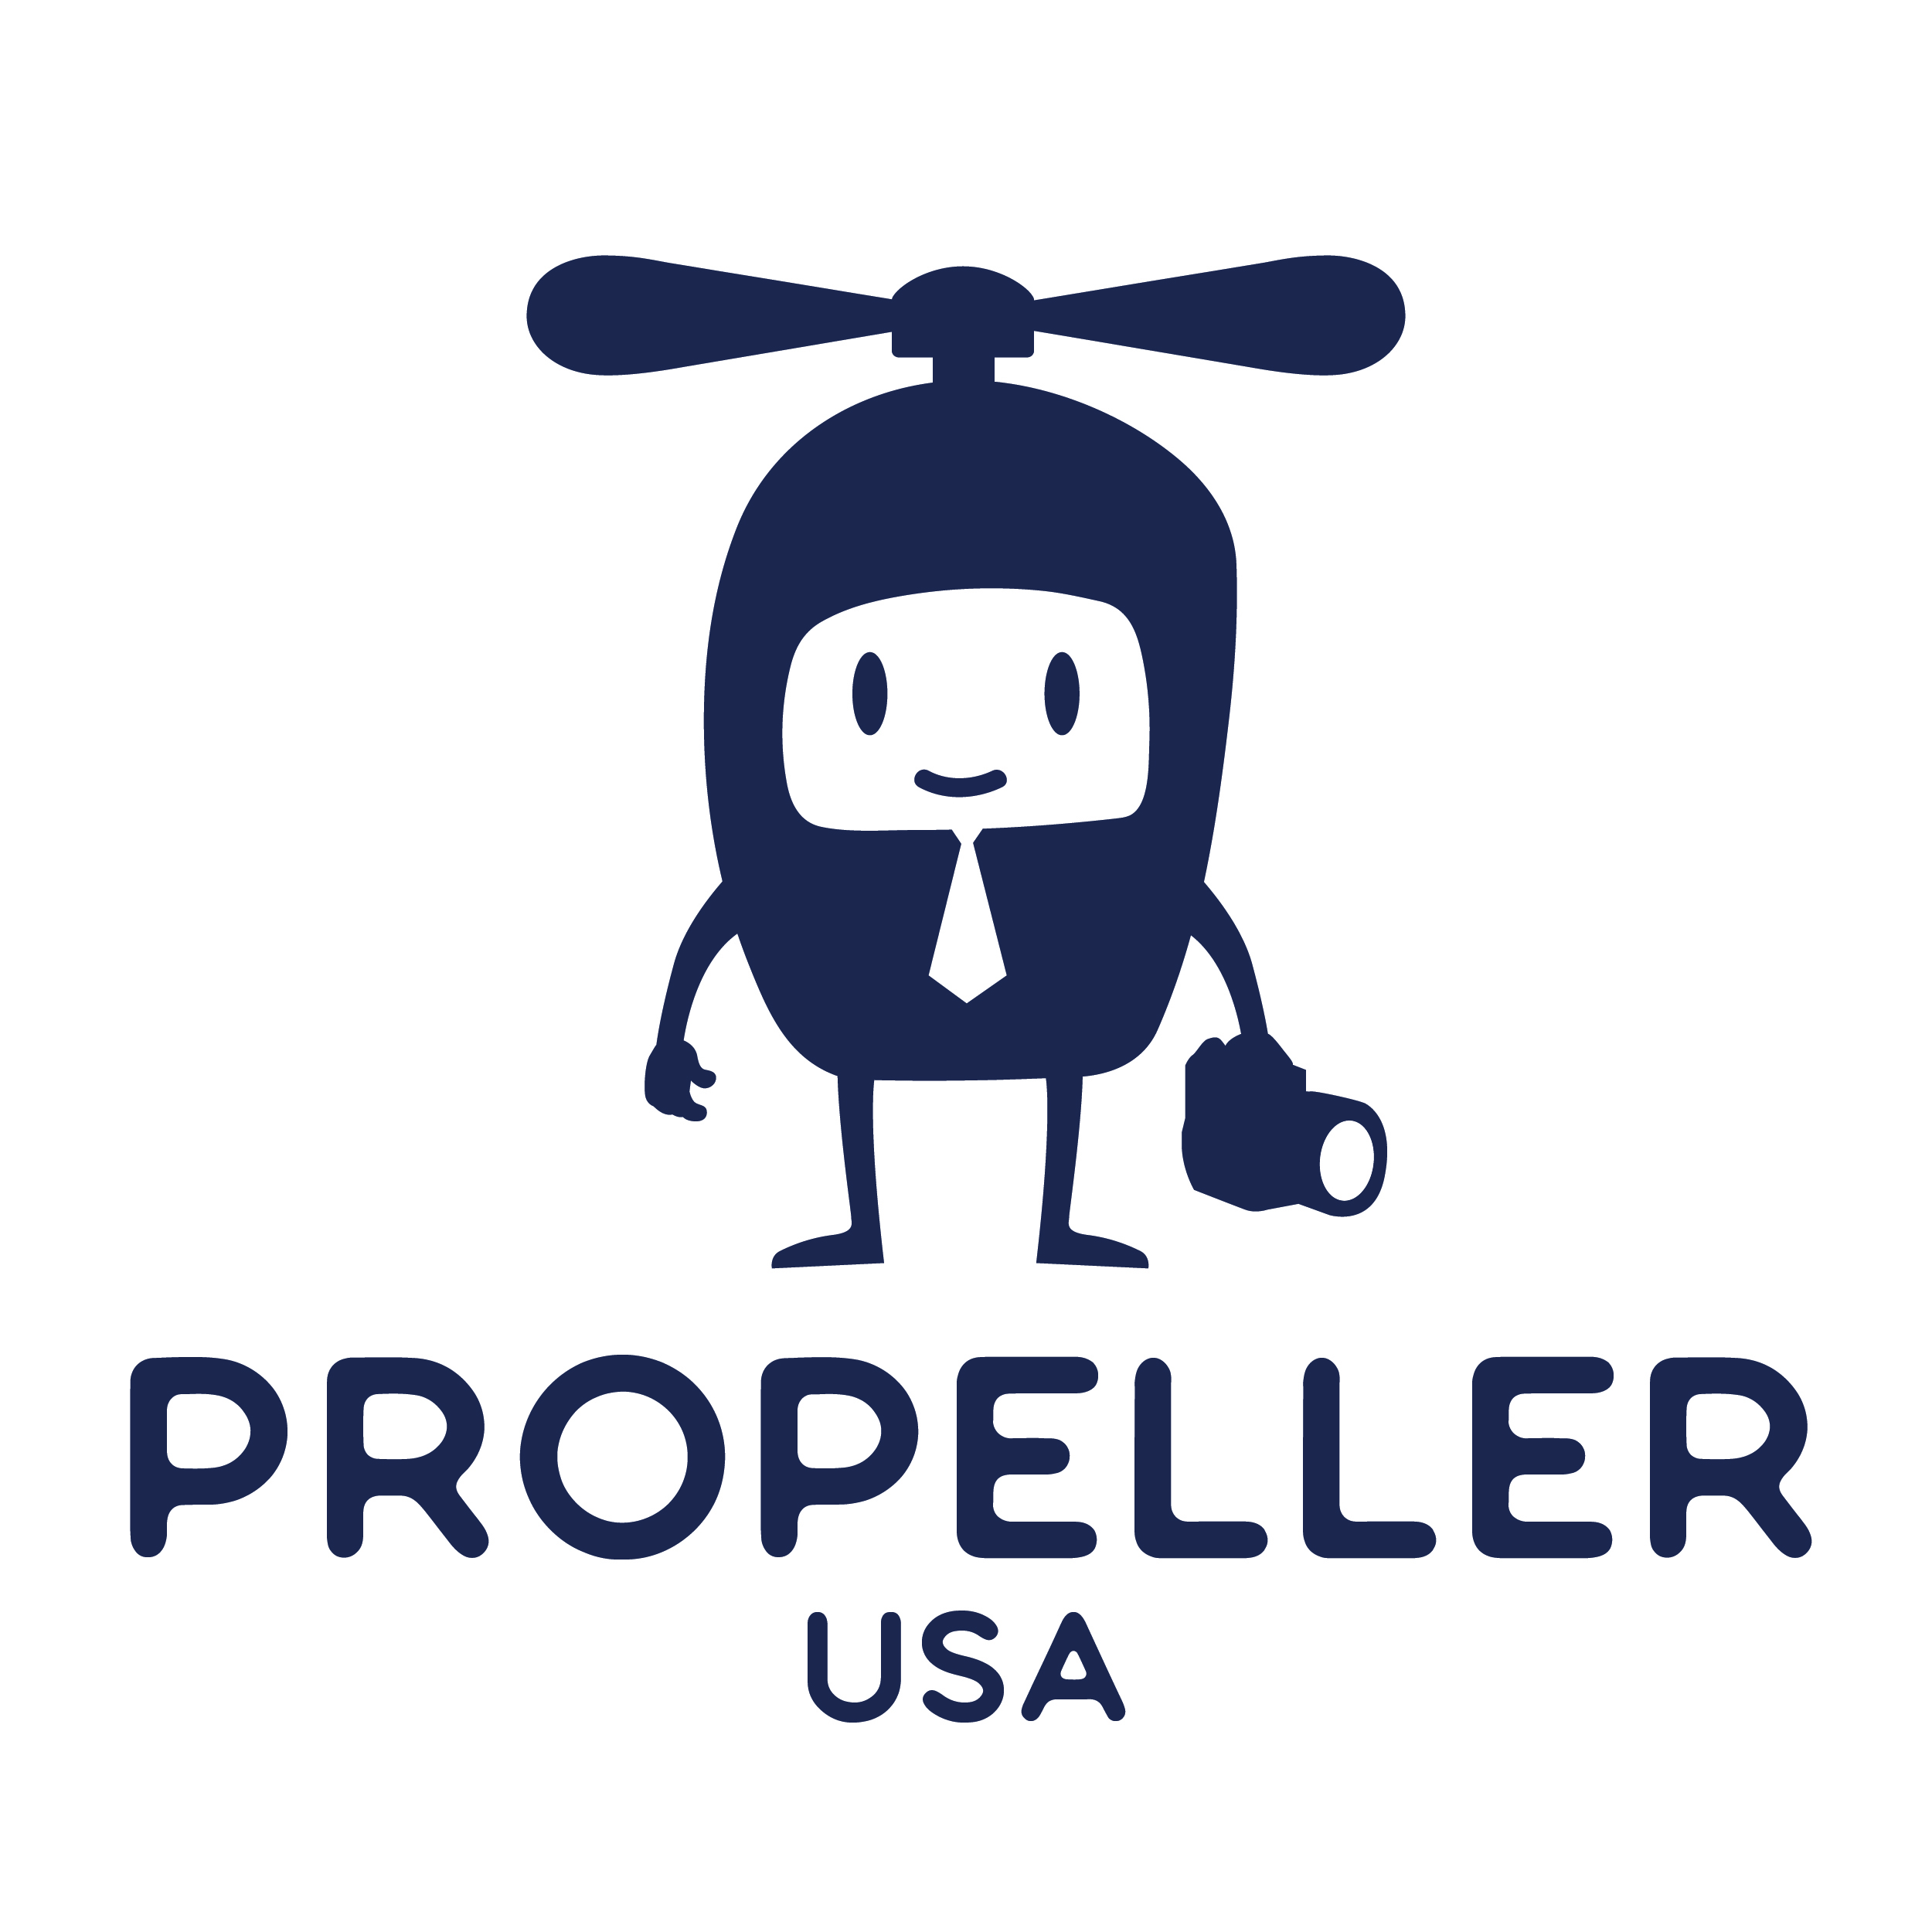 FREE Video from Propeller USA